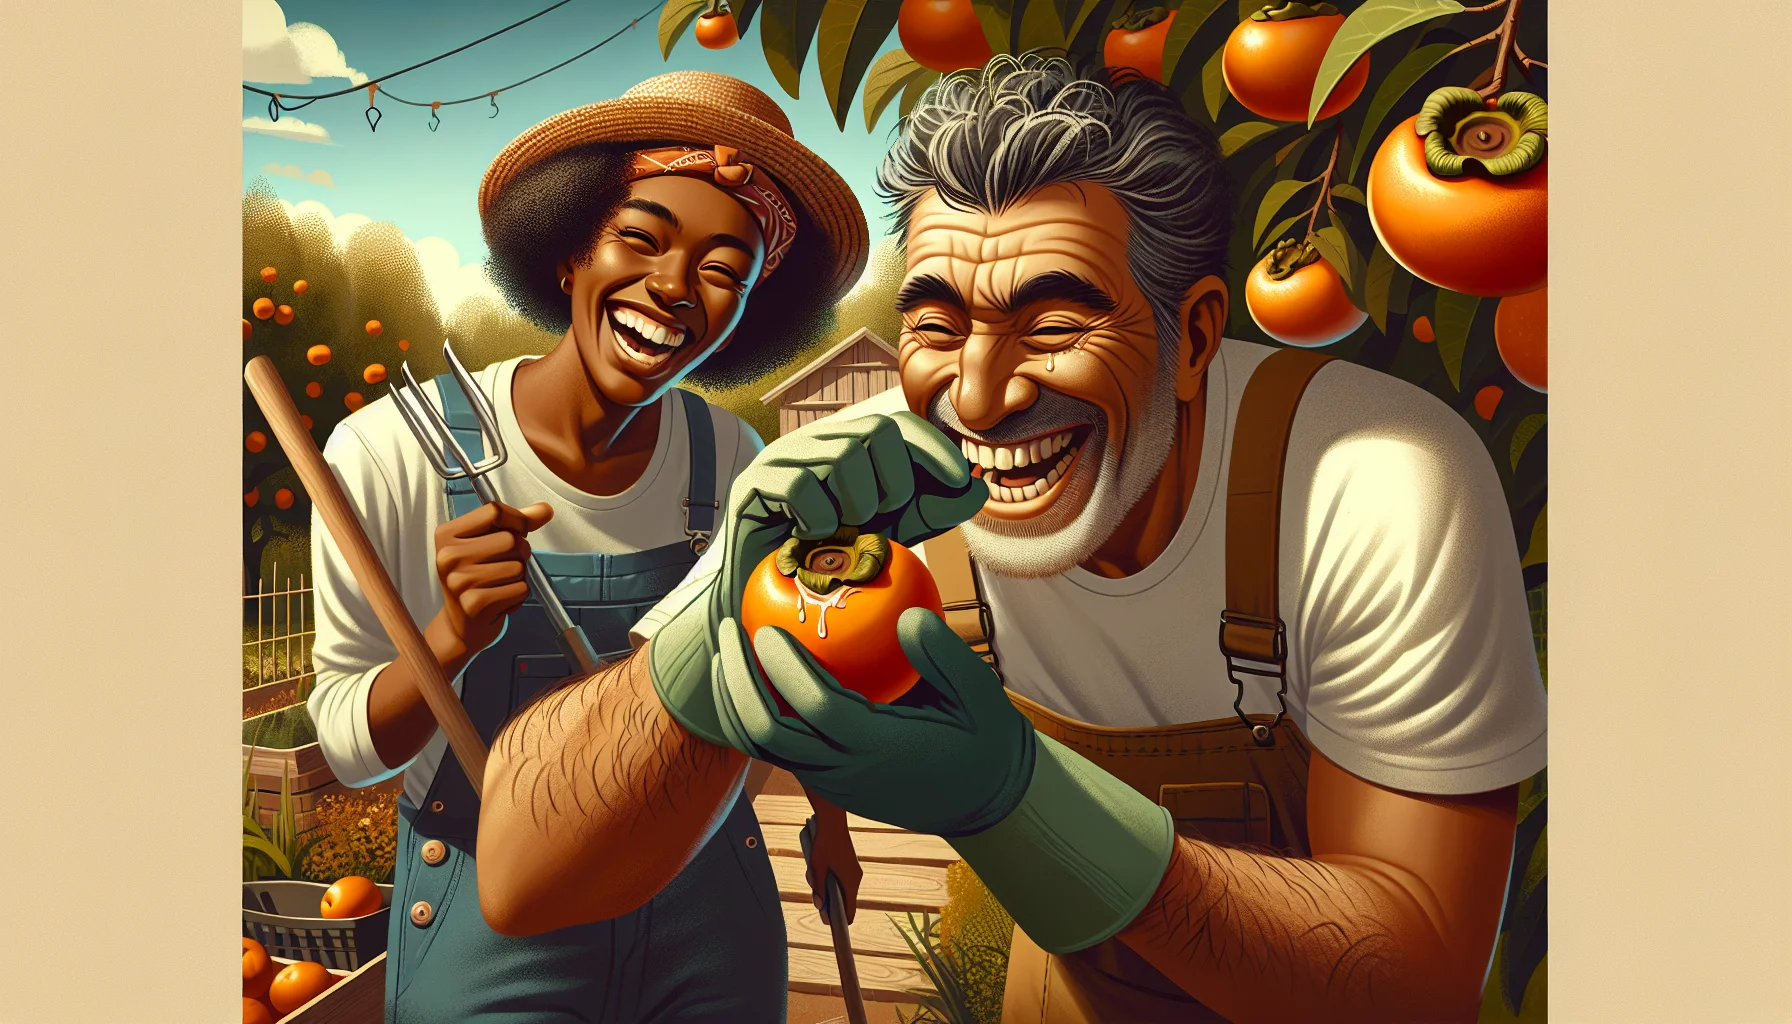 Illustrate an amusing and relatable situation of gardening with a sense of realism. The scene includes a mid-aged Hispanic man with a broad smile and a green thumb, wearing gloves and a straw hat, attempting to bite into a fresh persimmon straight off the tree. He is struggling a bit with the fruit's slippery peel as juice drips down his chin. At the same time, a young Black woman, wearing overalls with rolled up sleeves and a bandana, is laughing heartily while holding a ripe persimmon, ready to show him the proper way to eat it. Around them, the garden is filled with a variety of fruit-bearing plants and the warm, bright sunshine gives the feeling of a perfect day for outdoor activities.